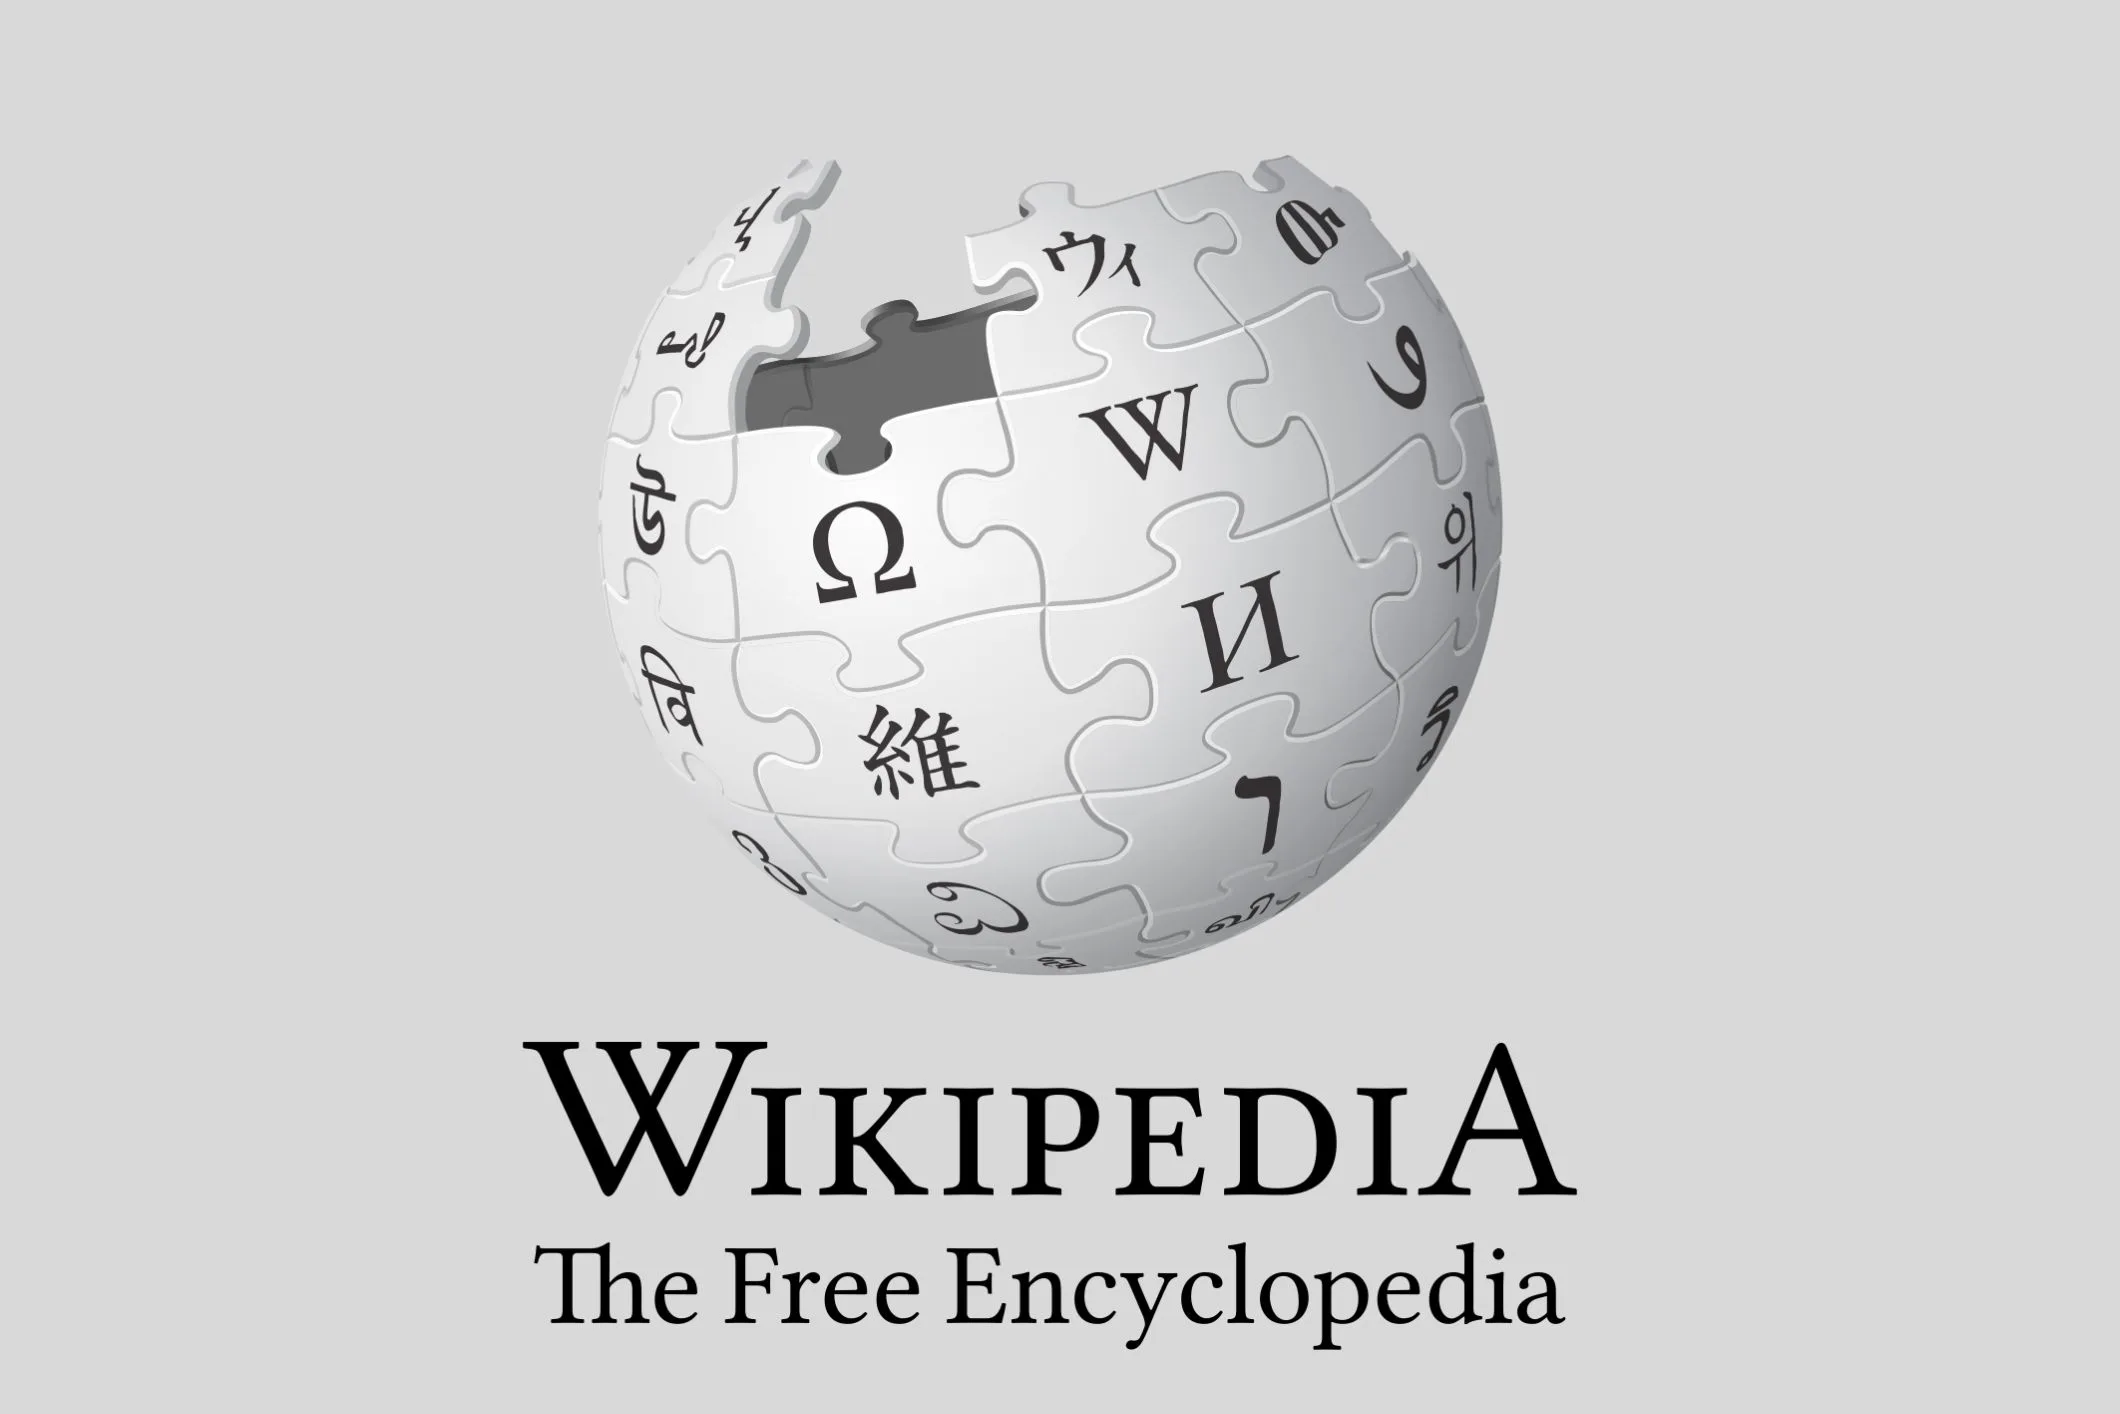 Pakistan Bans Wikipedia For 48 Hours over “Blasphemous” Content To Islam